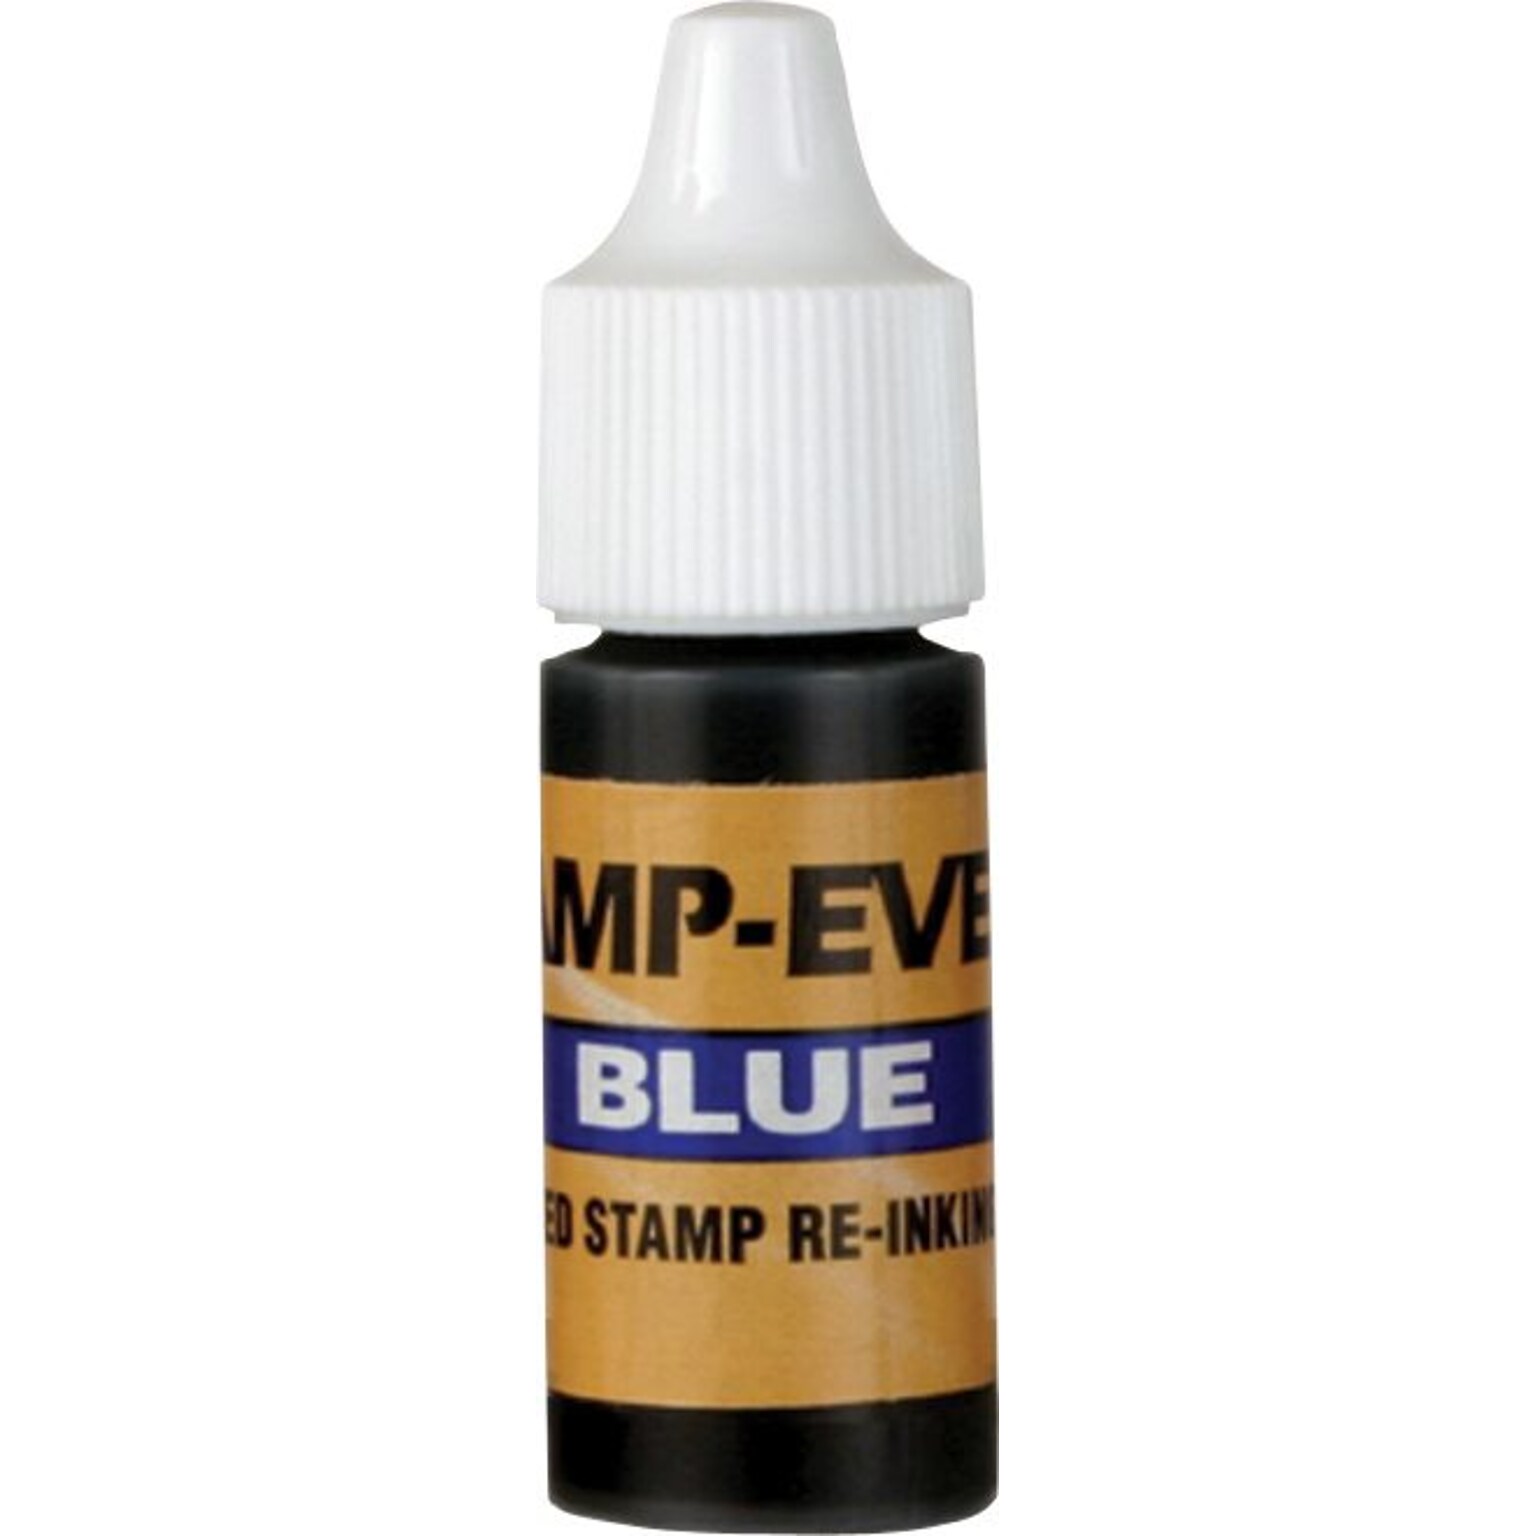 Re-inking Fluid for Stamp-Ever Pre-inked Stamps, Blue